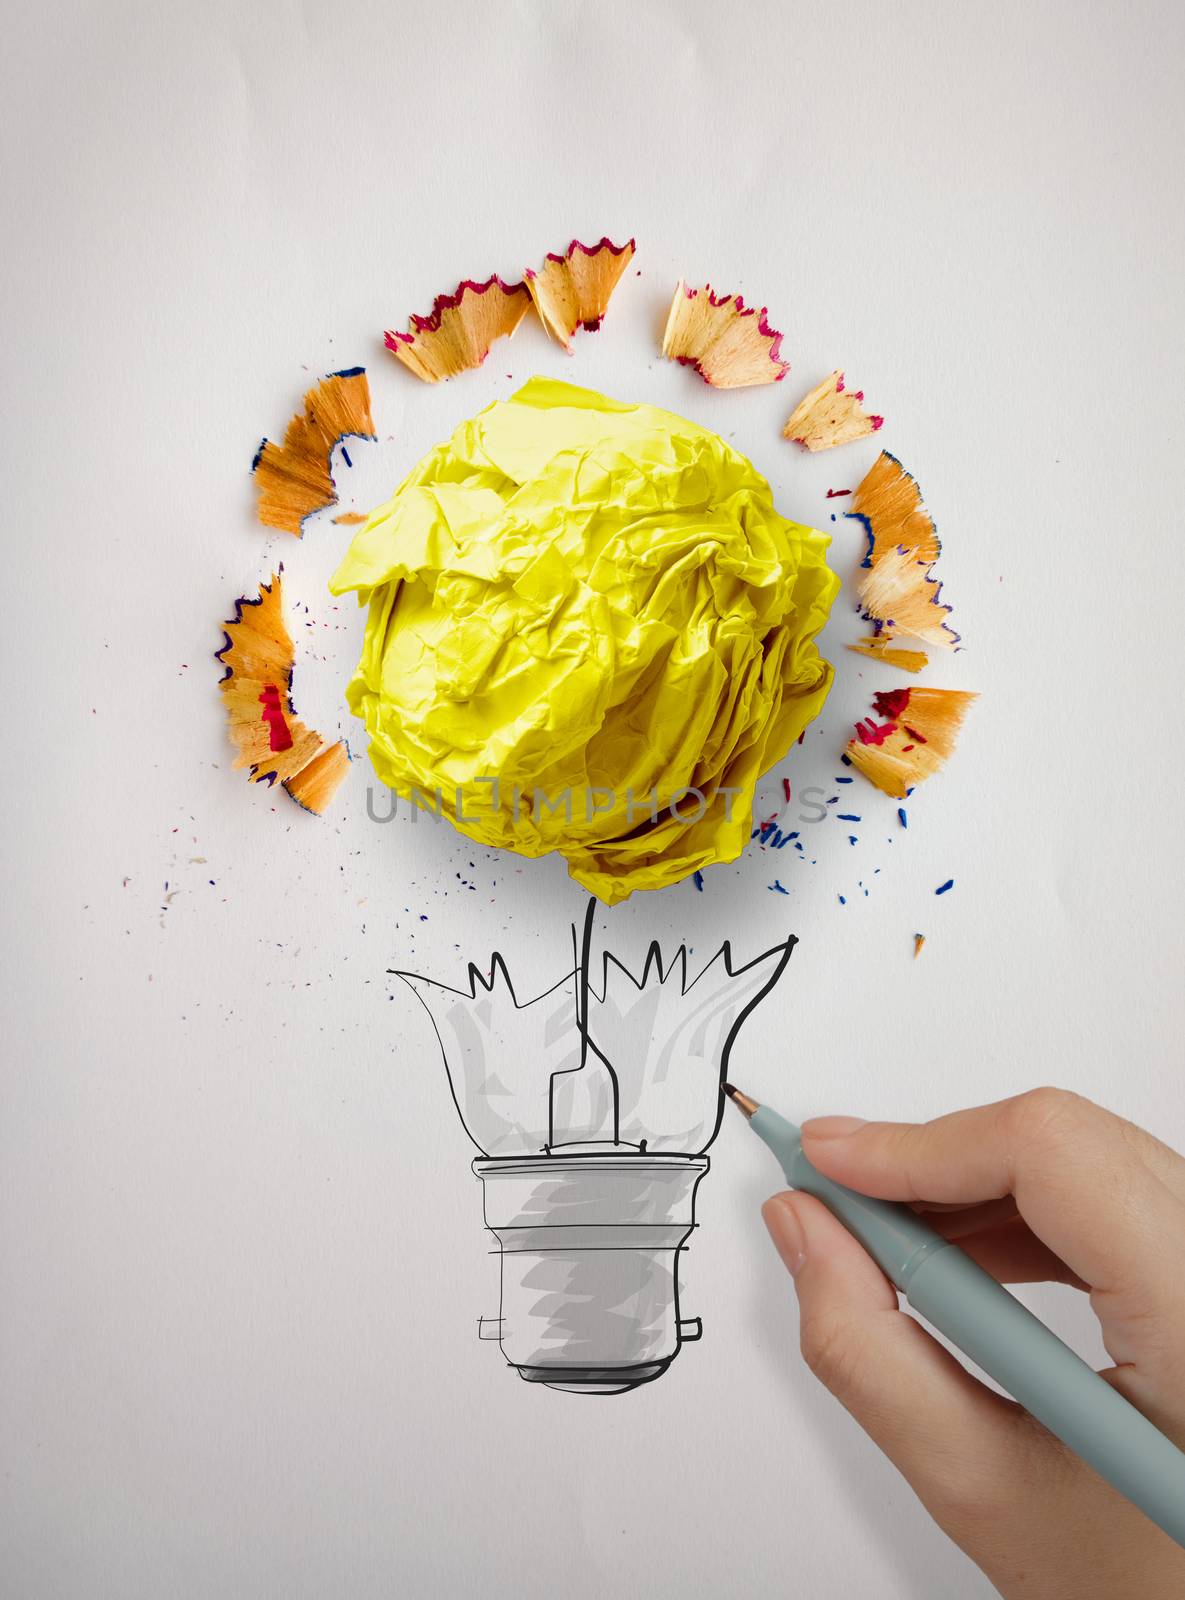 hand drawing  light bulb and crumpled paper with pencil saw dust on paper background as creative concept